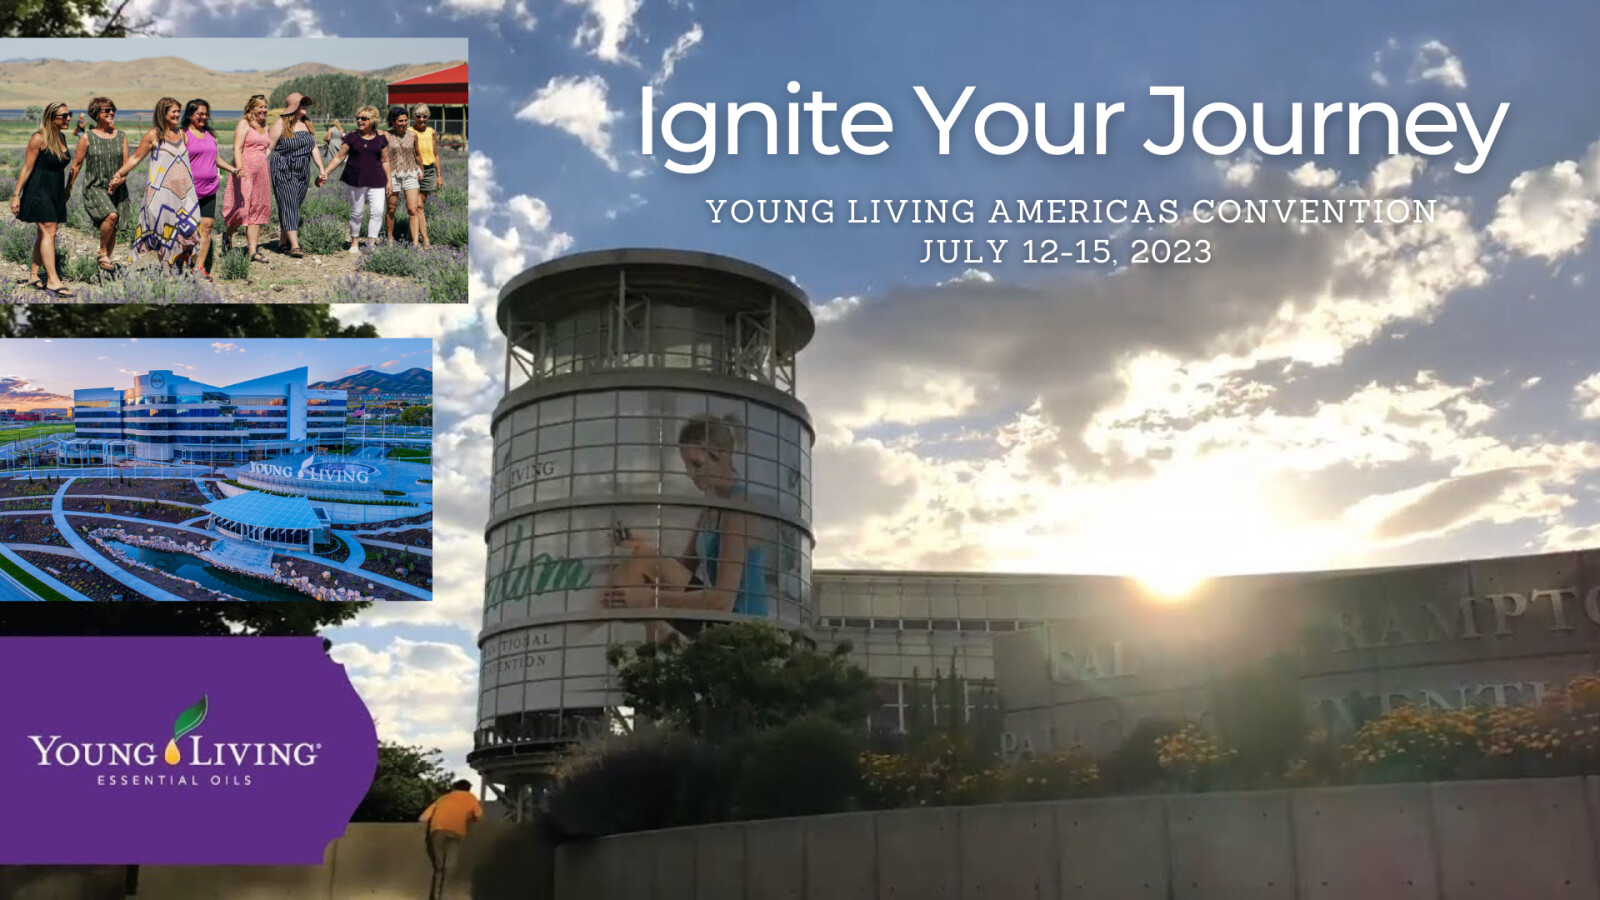 Ignite Your Journey at the 2023 Young Living Americas Convention